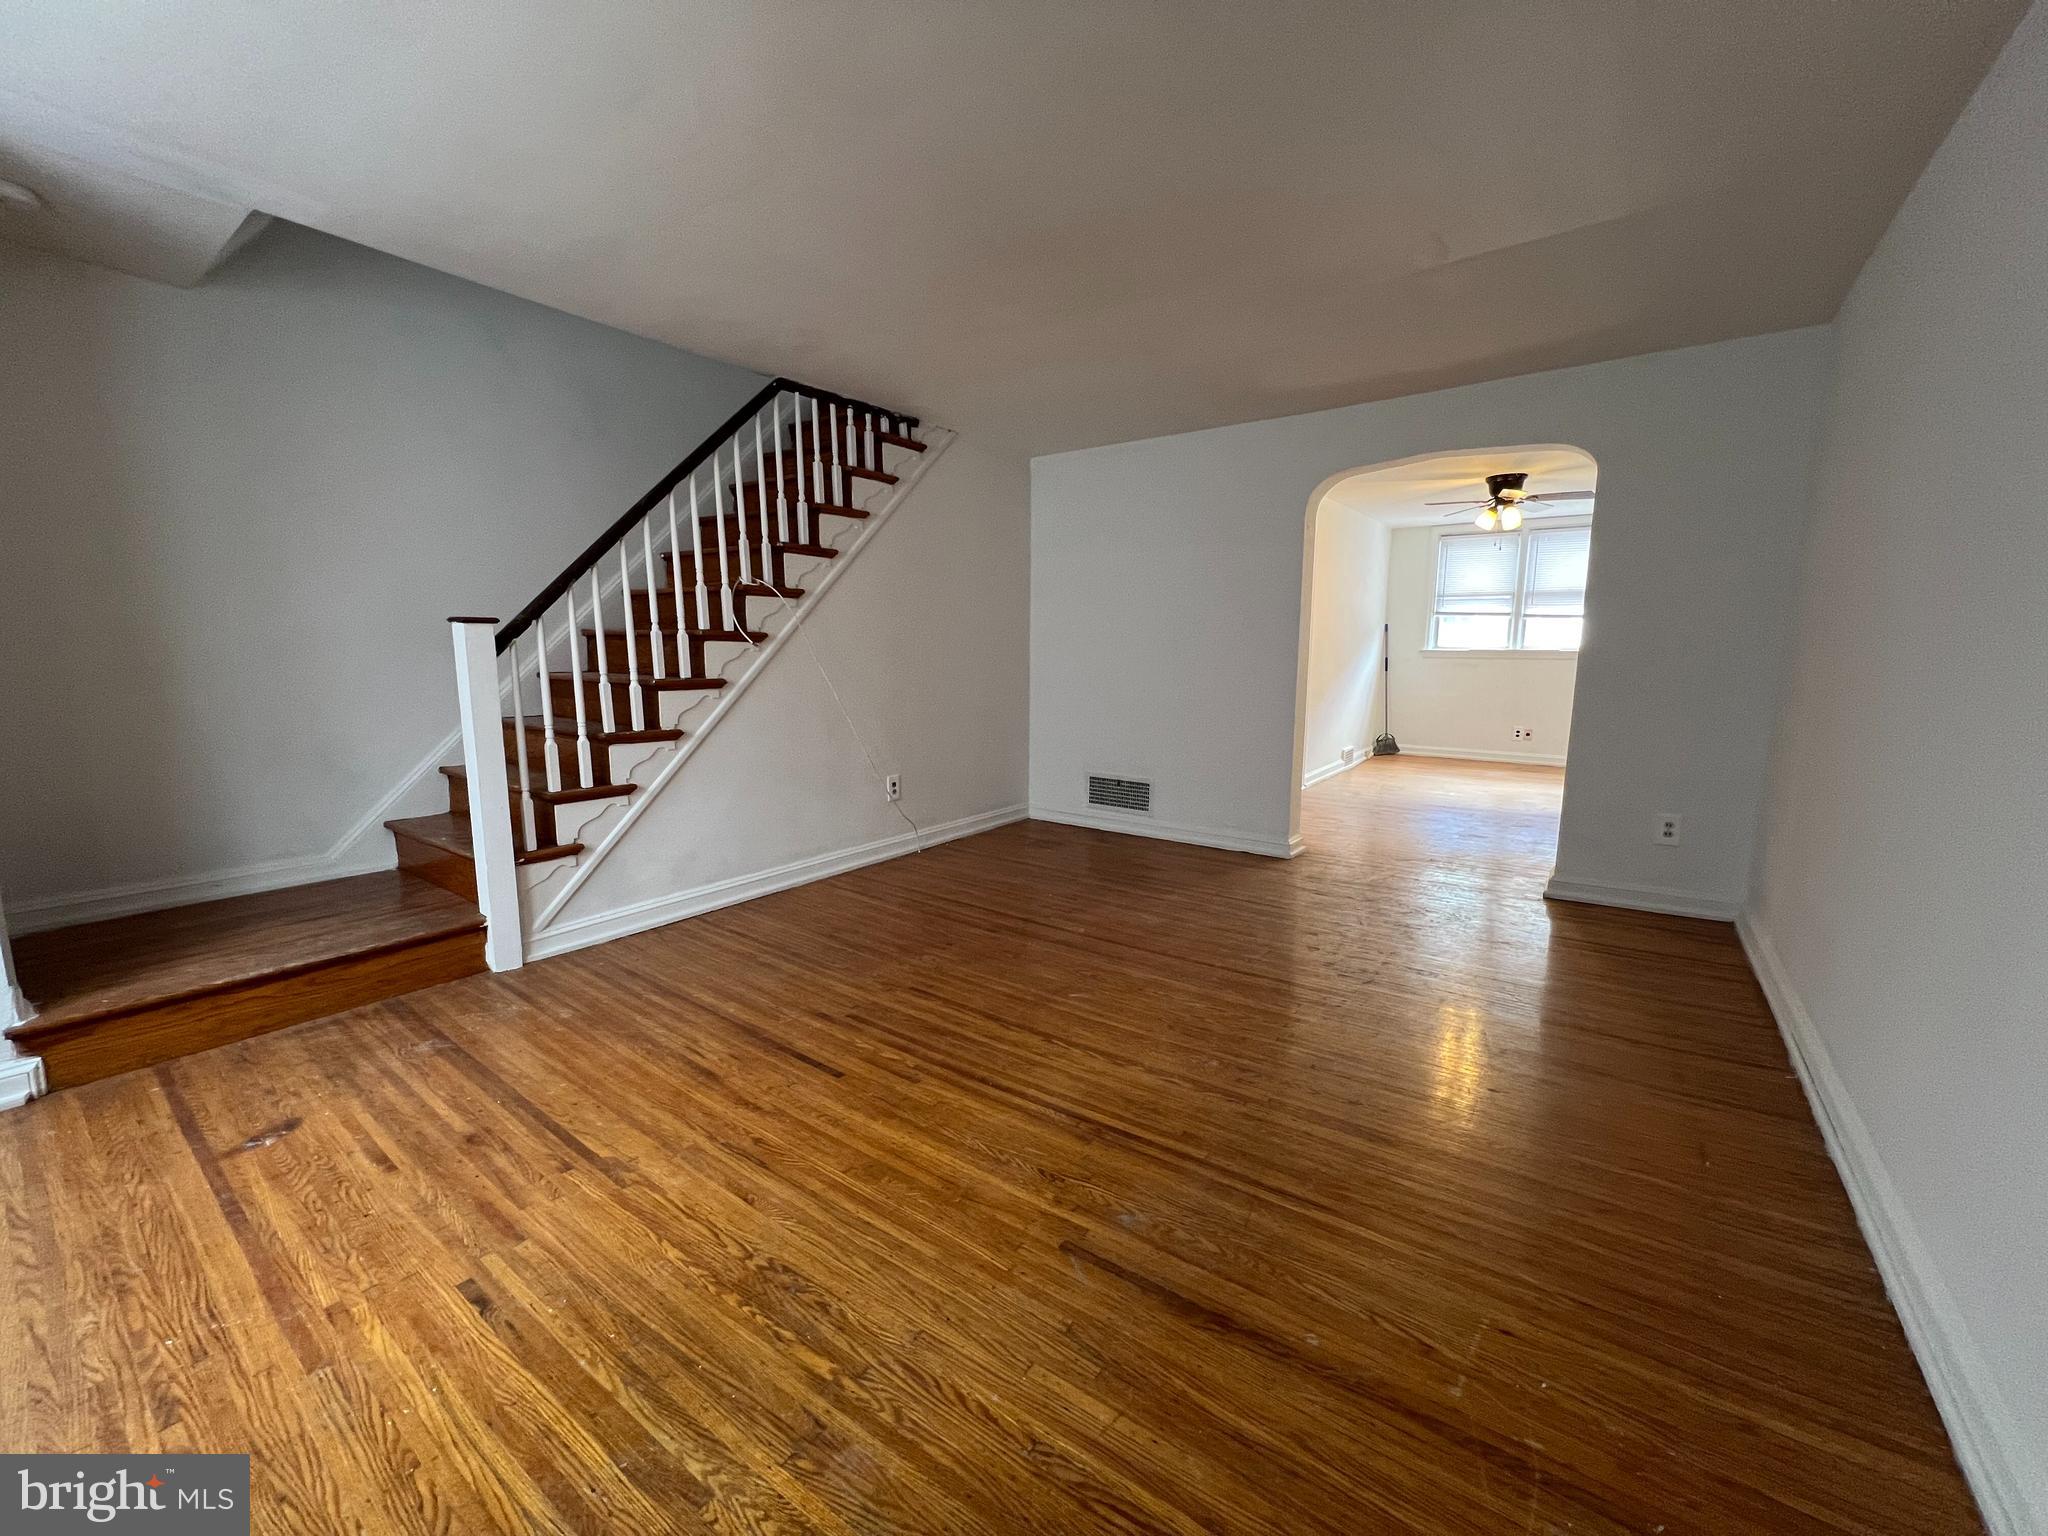 a view of an empty room with wooden floor and stairs